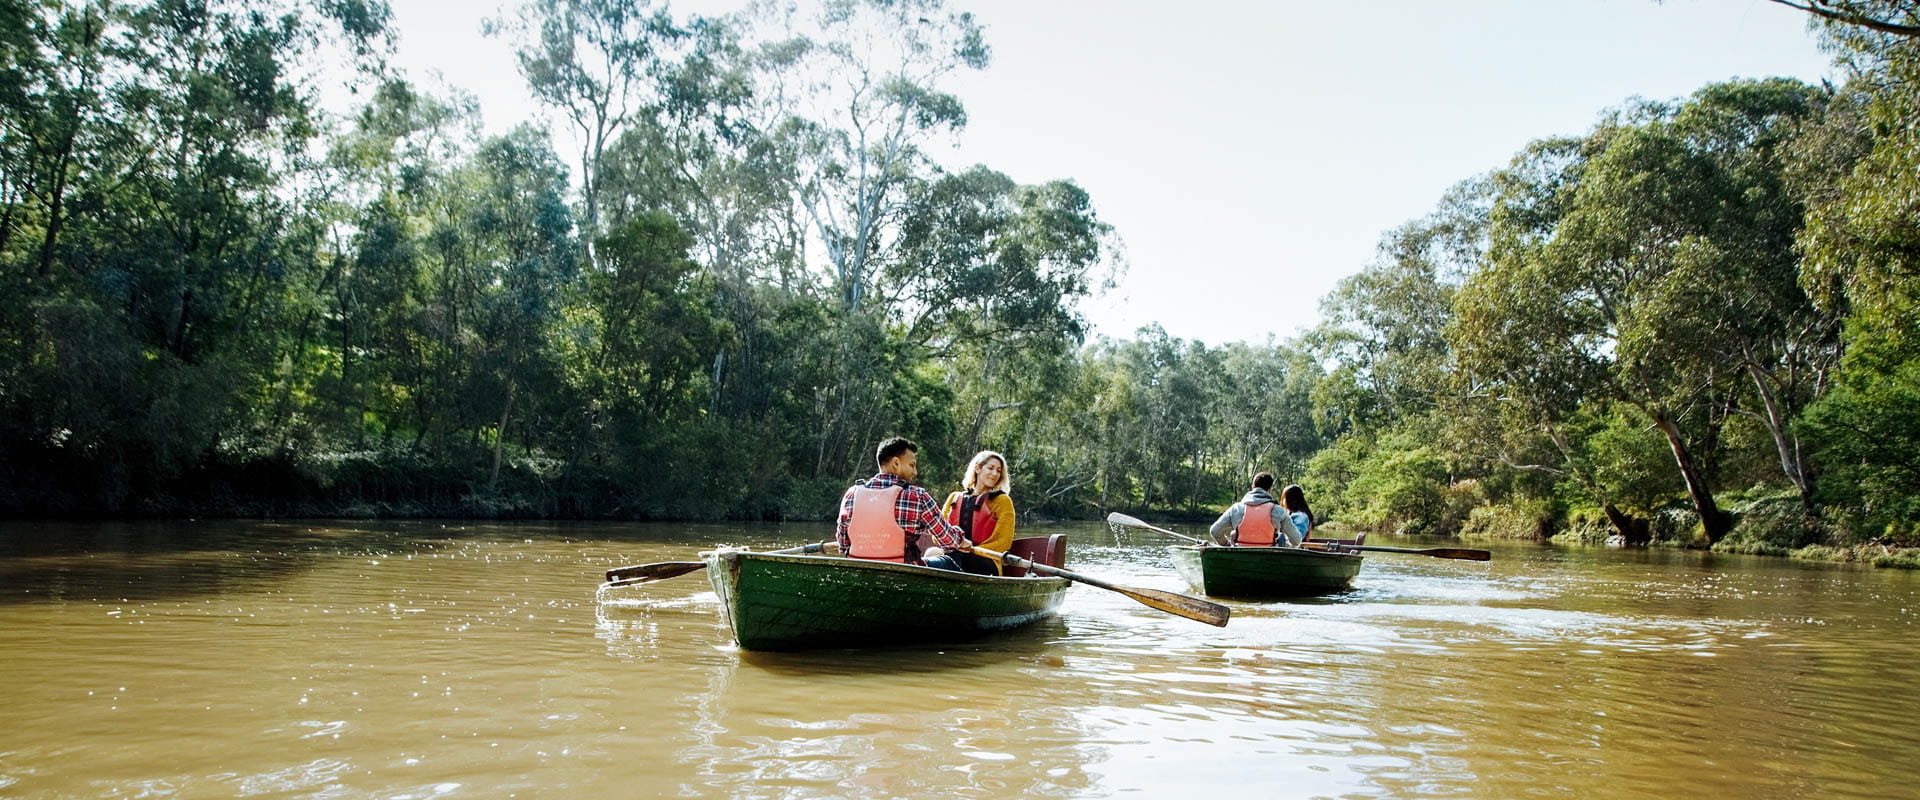 Two pairs of people row boat down a river with tall trees on its banks. 